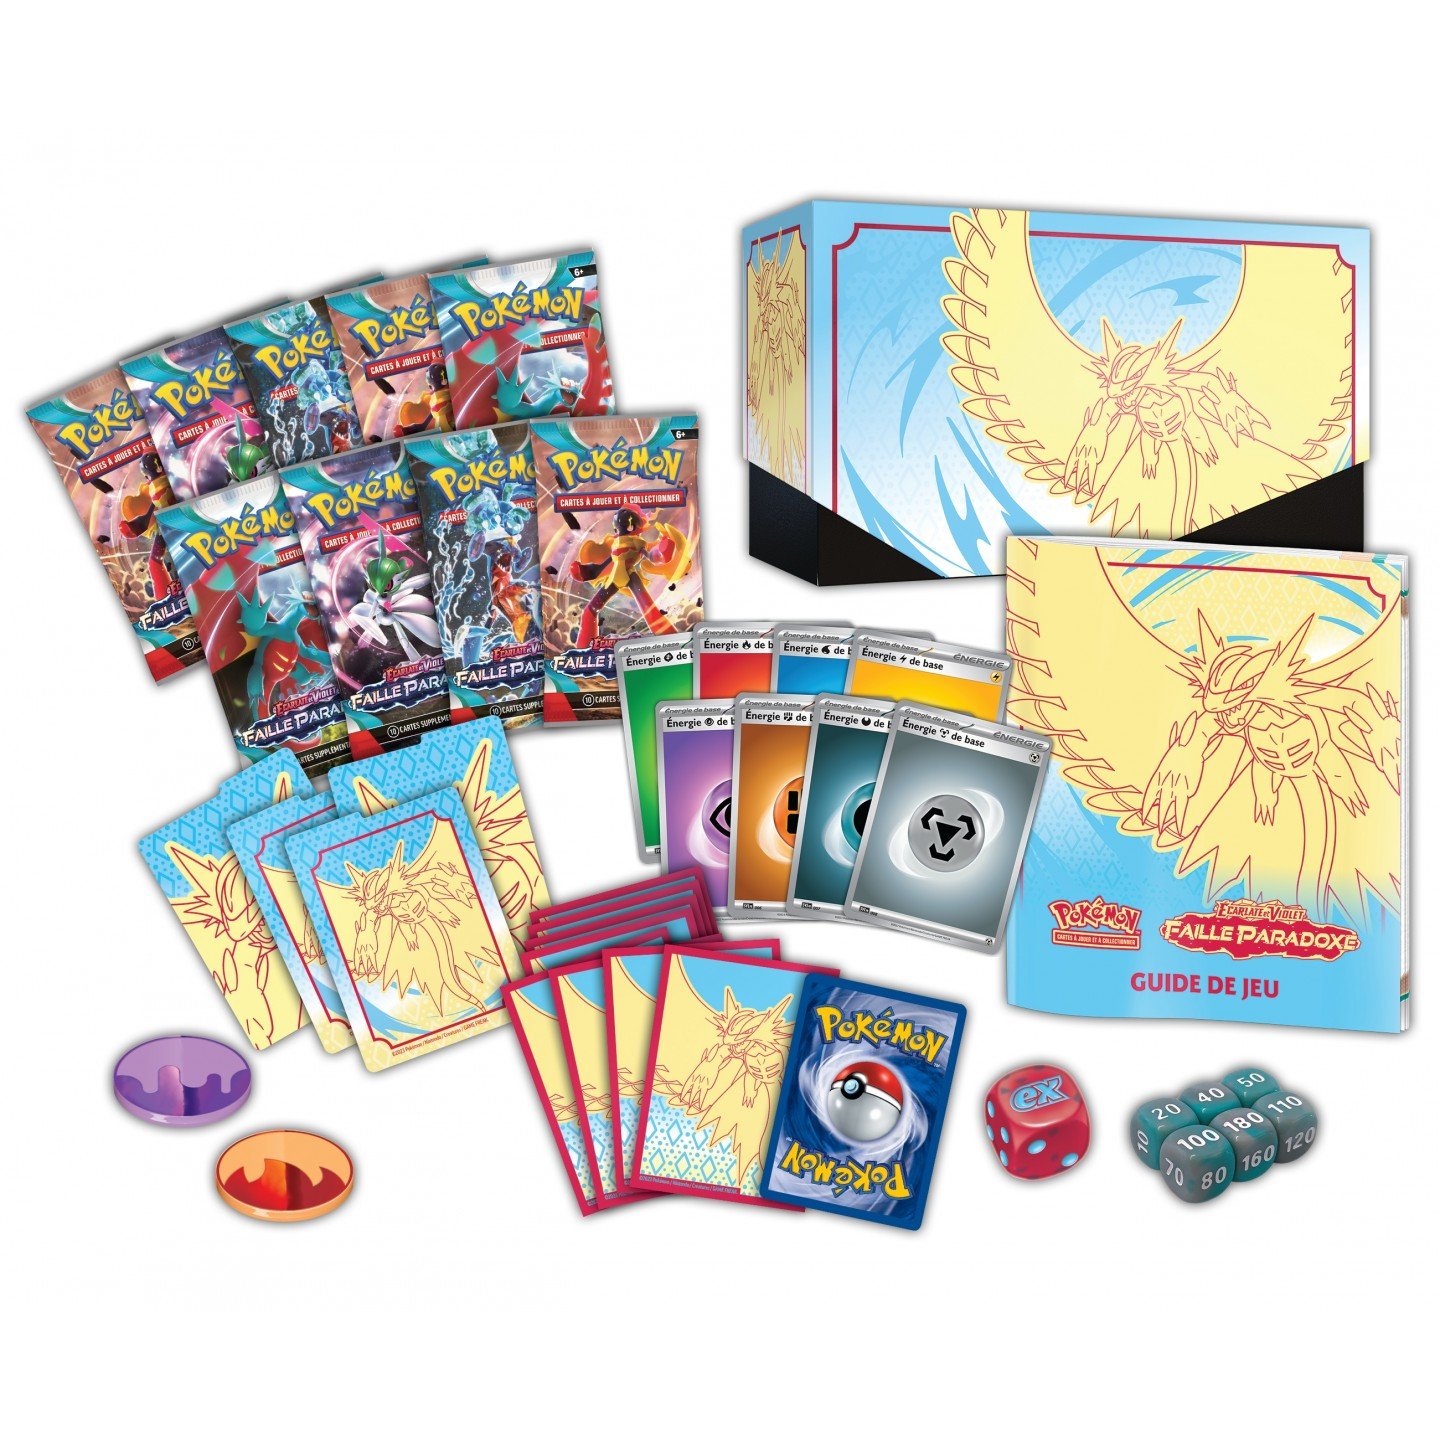 Coffret collector 50 cartes, Wednesday